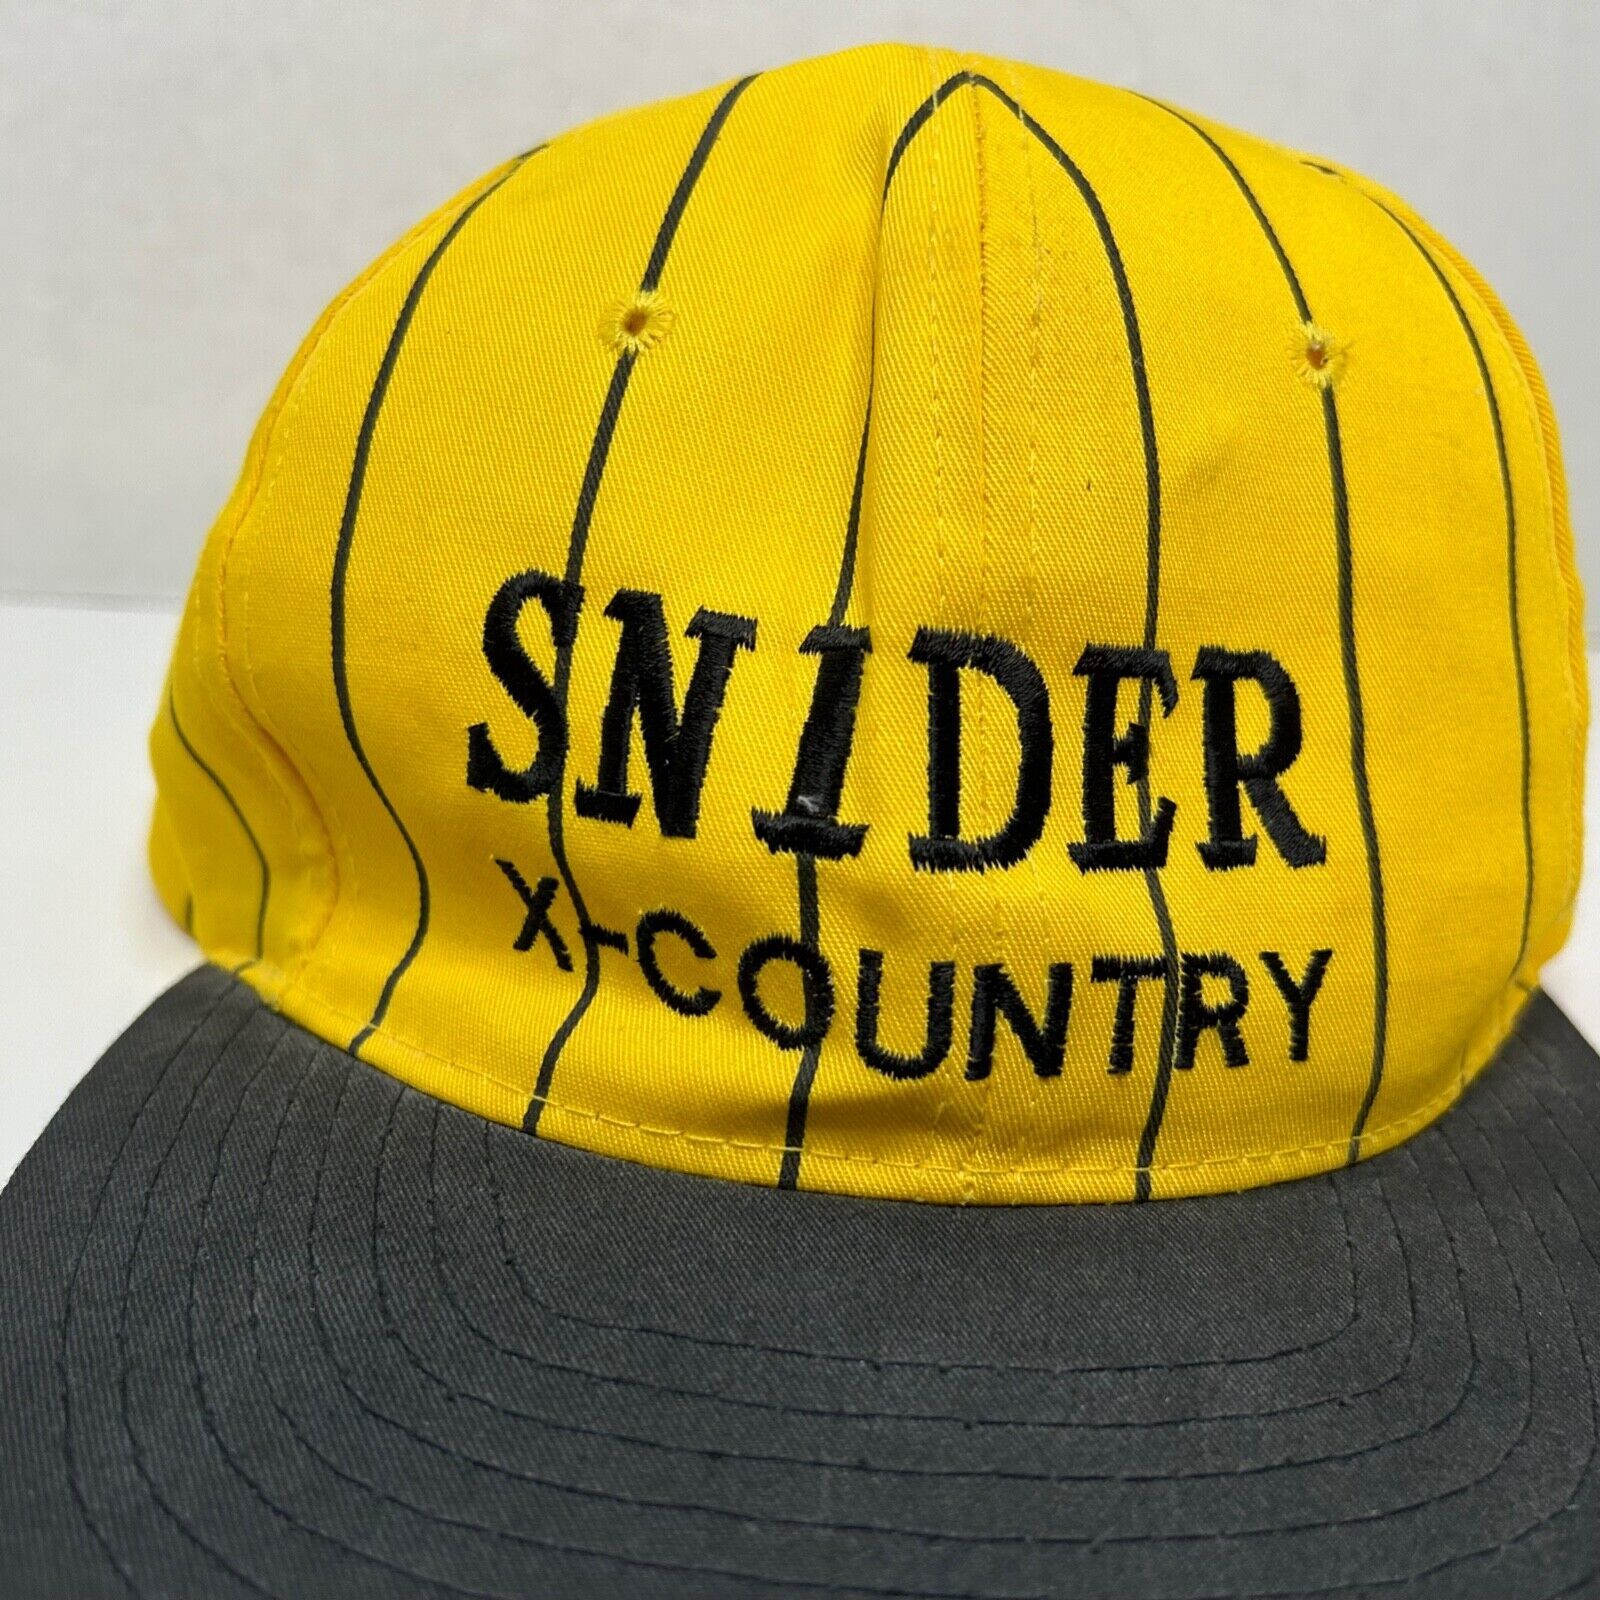 Primary image for Vtg Snider X-Country Hat Snapback Cap Yellow Black Fort Wayne Indiana Cross Ft